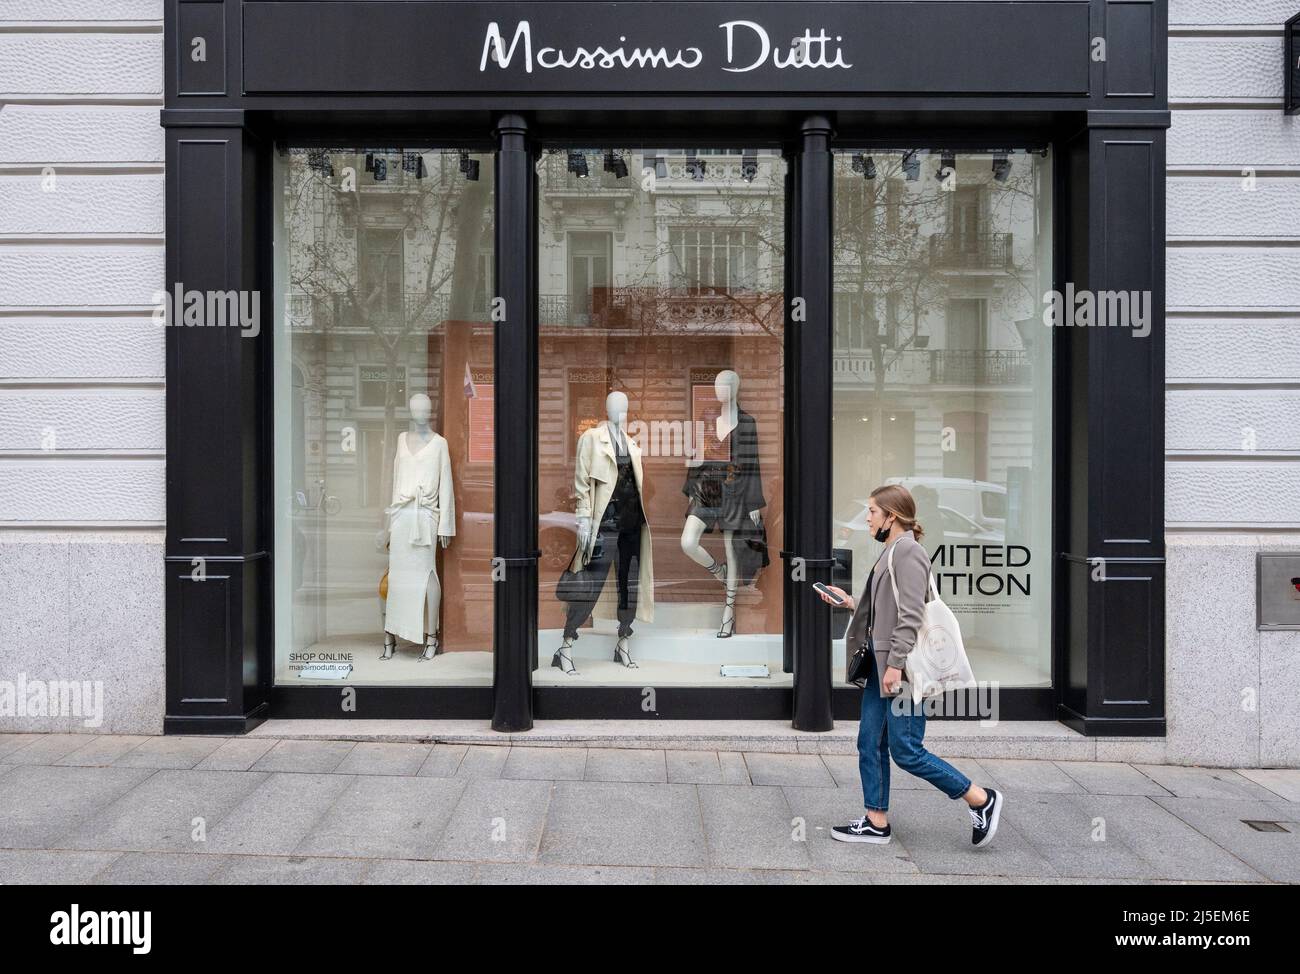 Massimo dutti store hi-res stock photography and images - Page 2 - Alamy